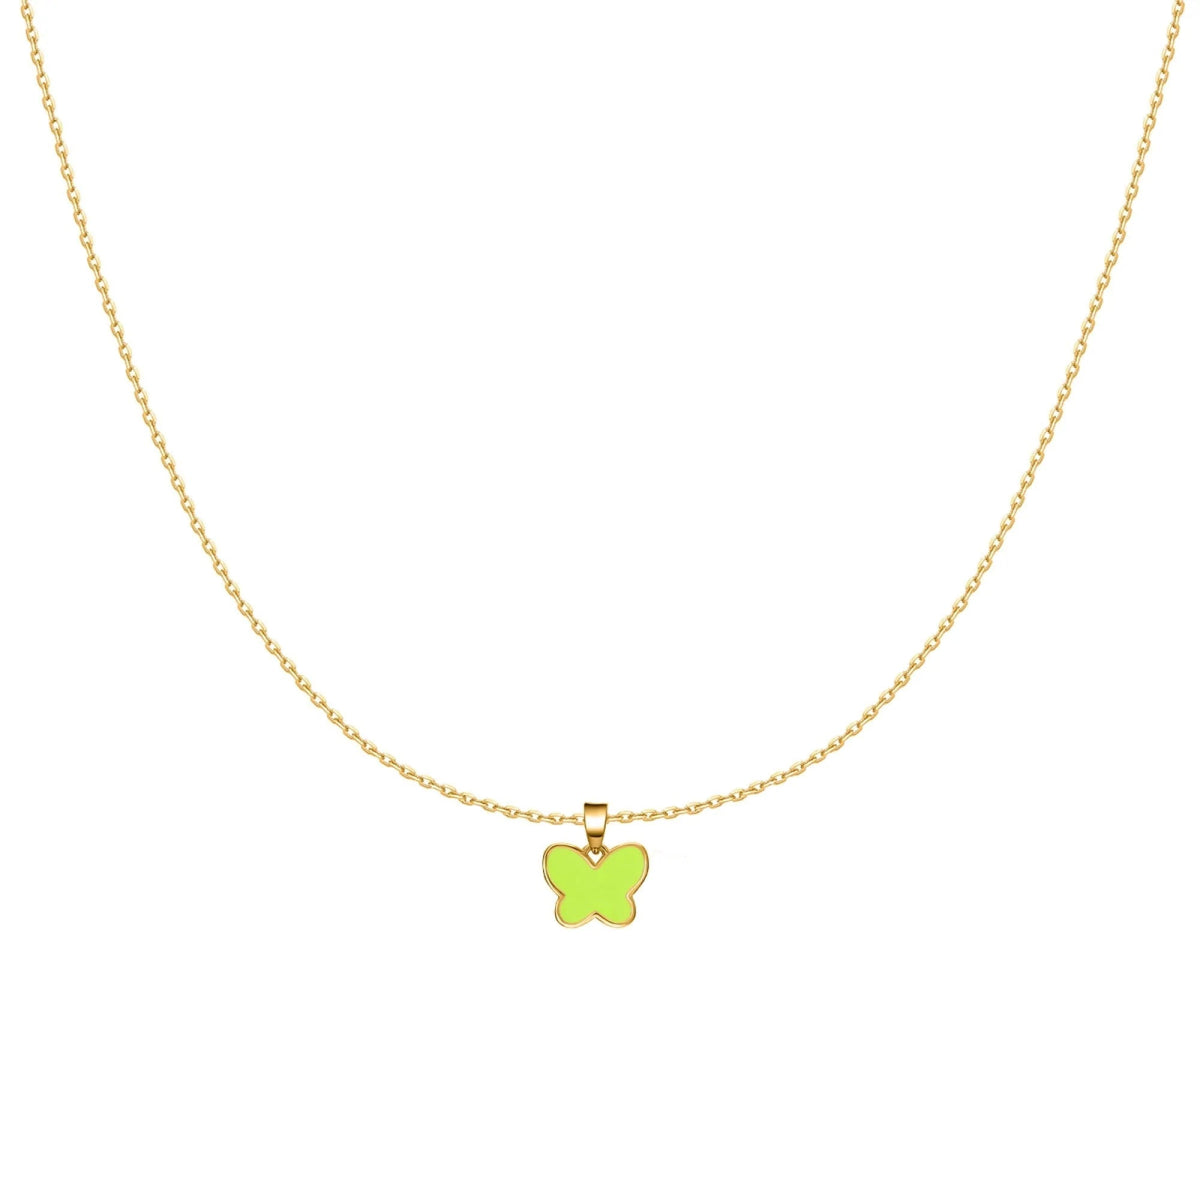 "Green Butterfly" Necklace - Milas Jewels Shop